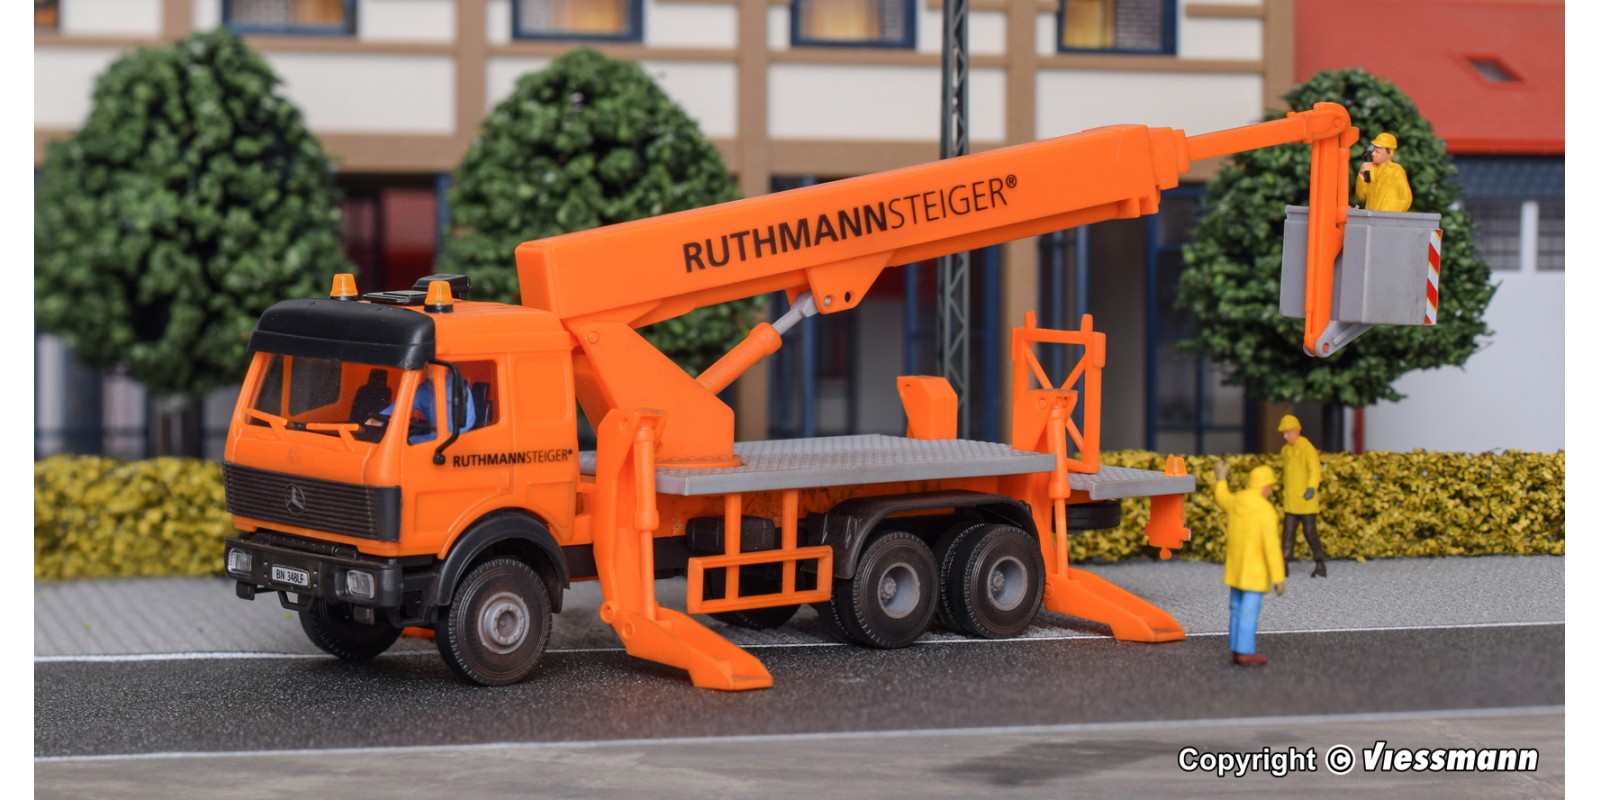 KI15008 H0 MB SK with RUTHMANN Steiger working cage